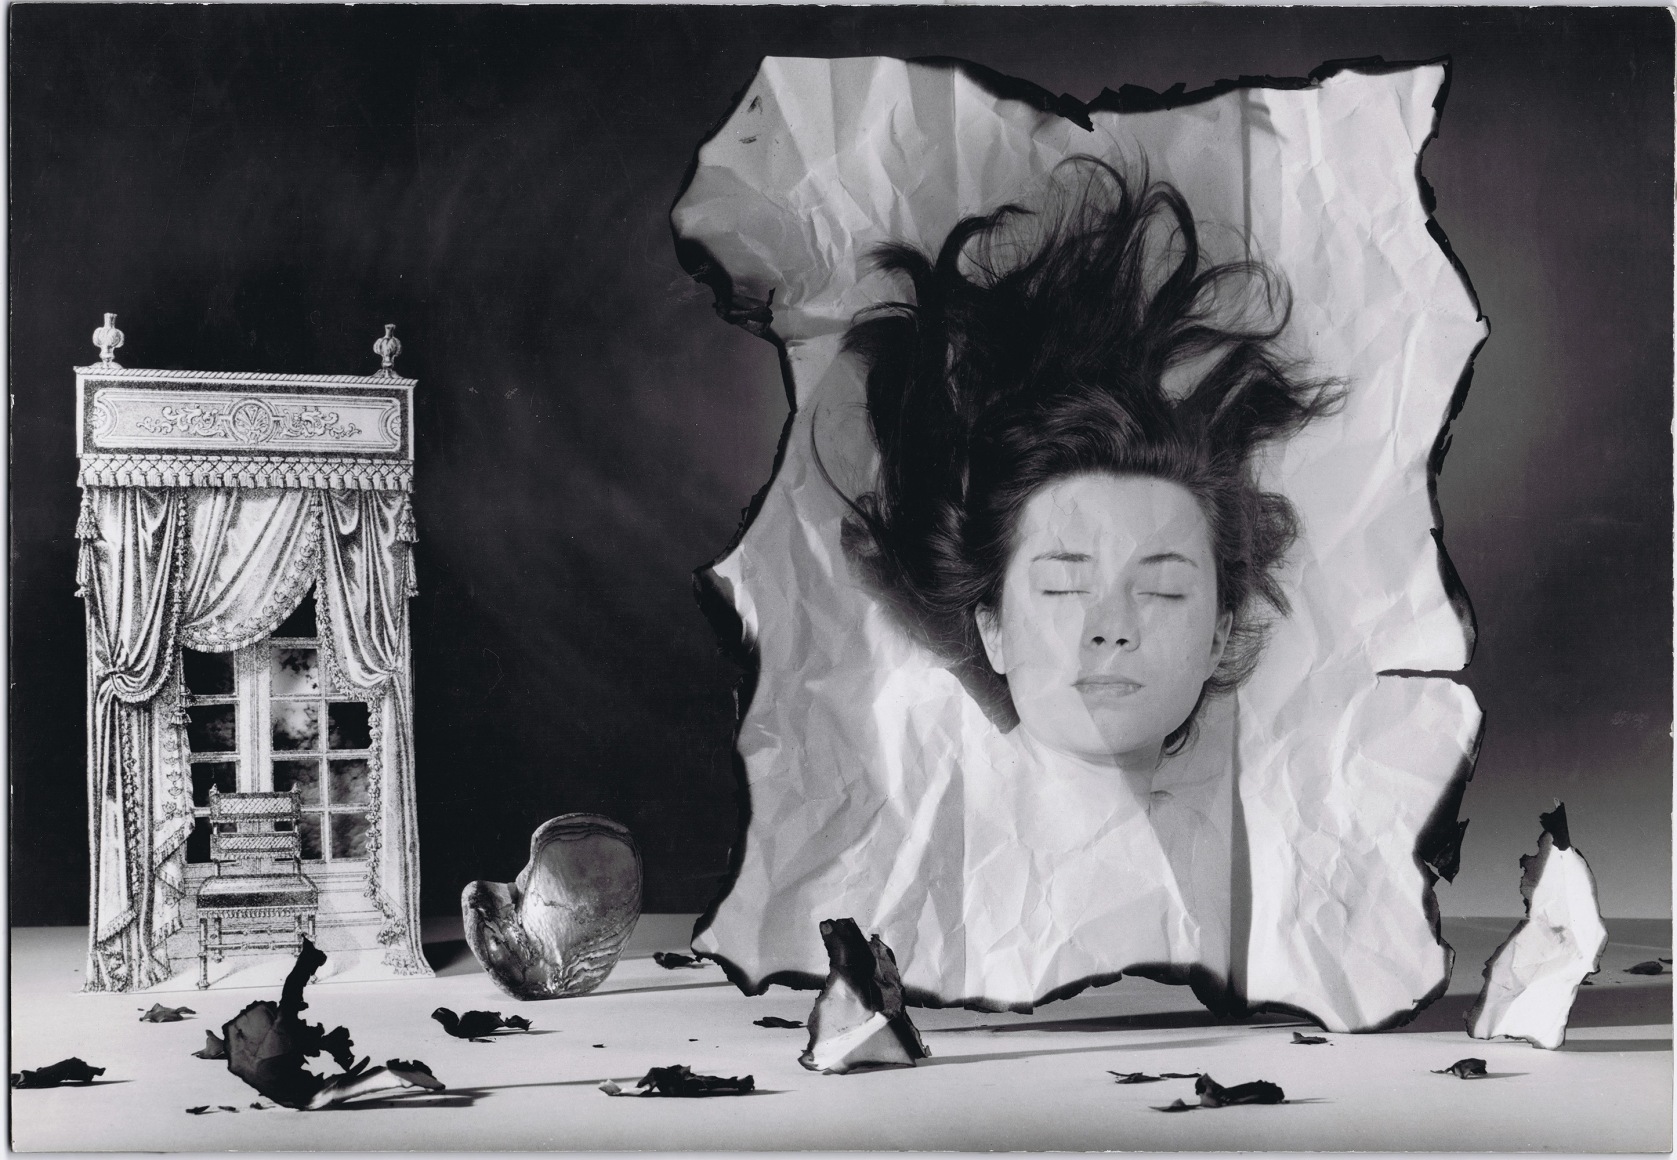 Rolf Tietgens, Patricia Highsmith, ​1942. Image of a woman with closed eyes and hair spread as if laying down, superimposed on a still life with burned paper and a small window and chair tableau.